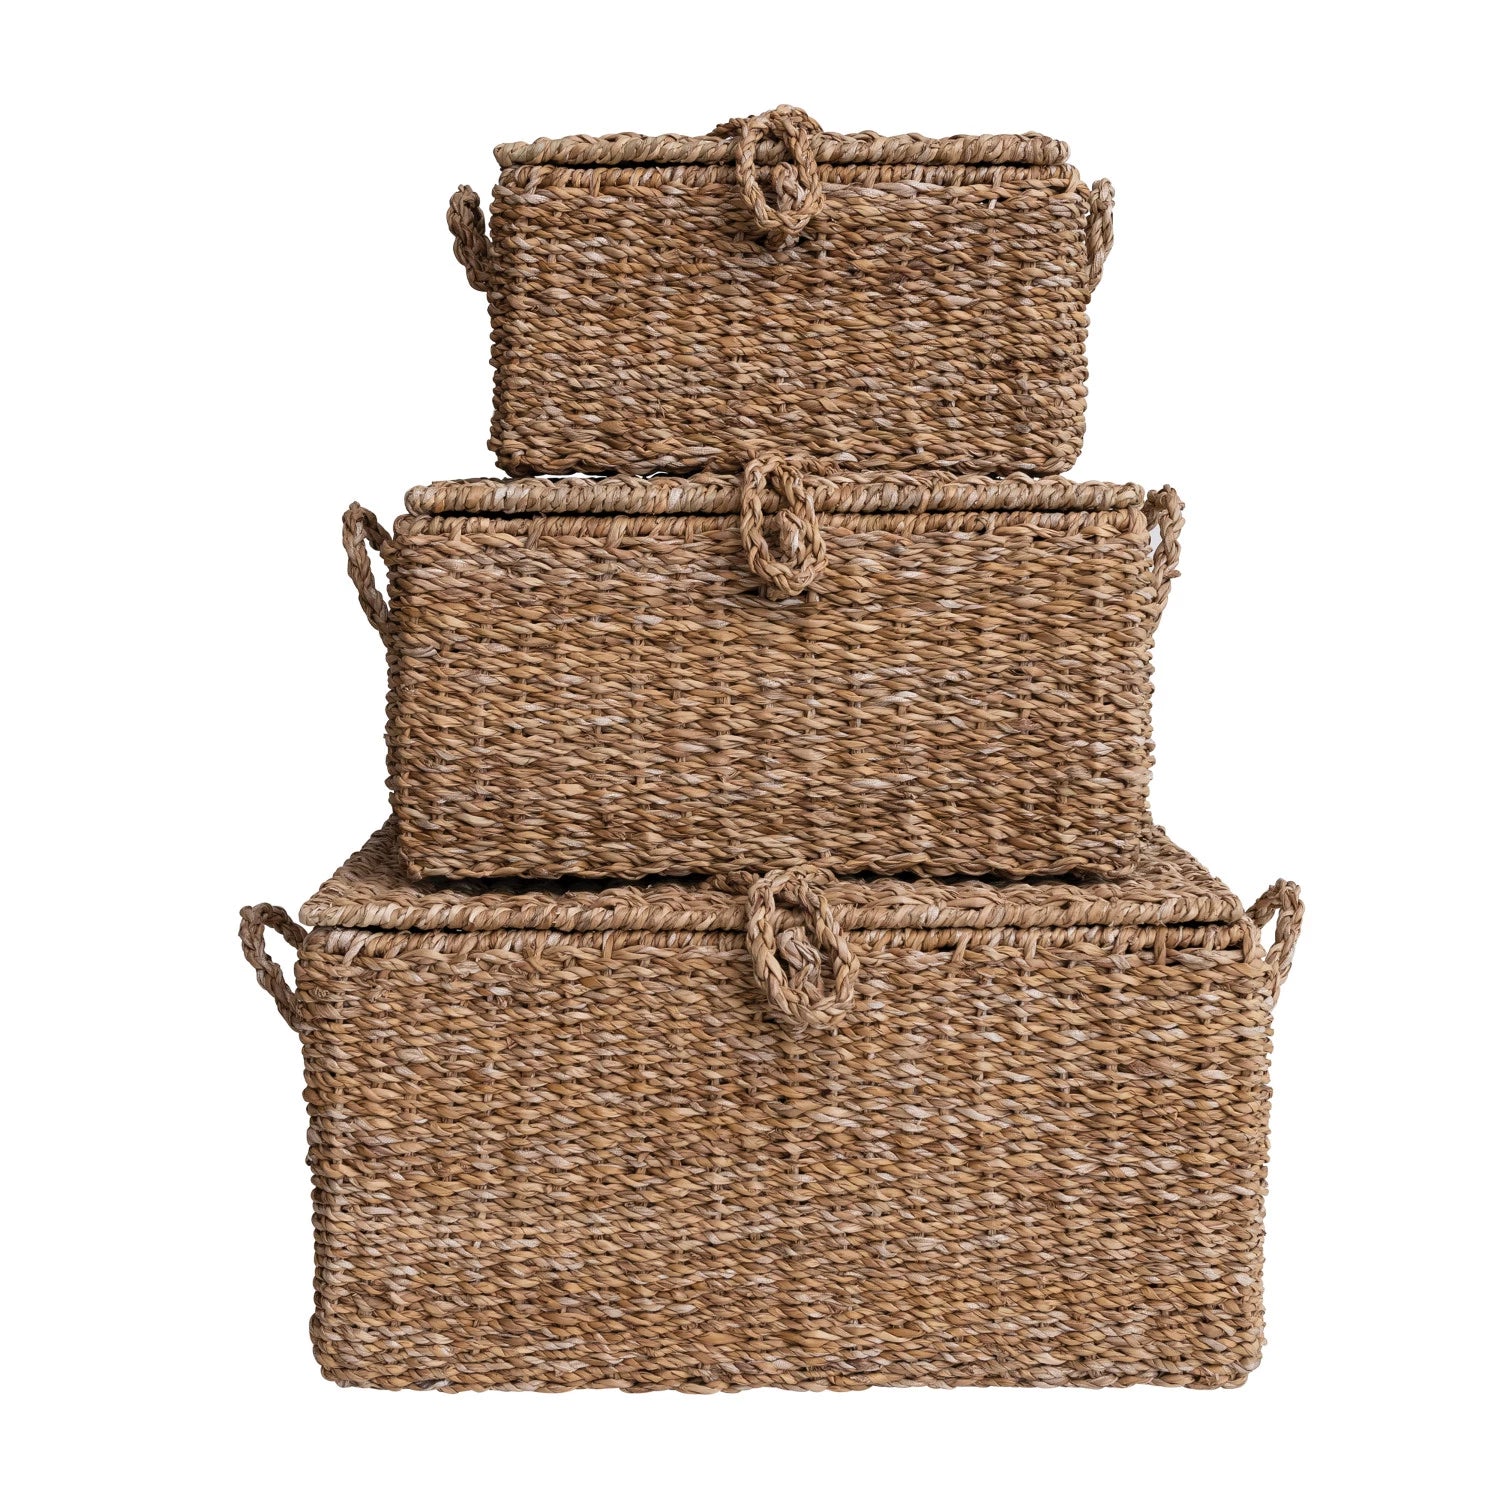 Woven Seagrass & Wire Framed Trunks, Set of 3